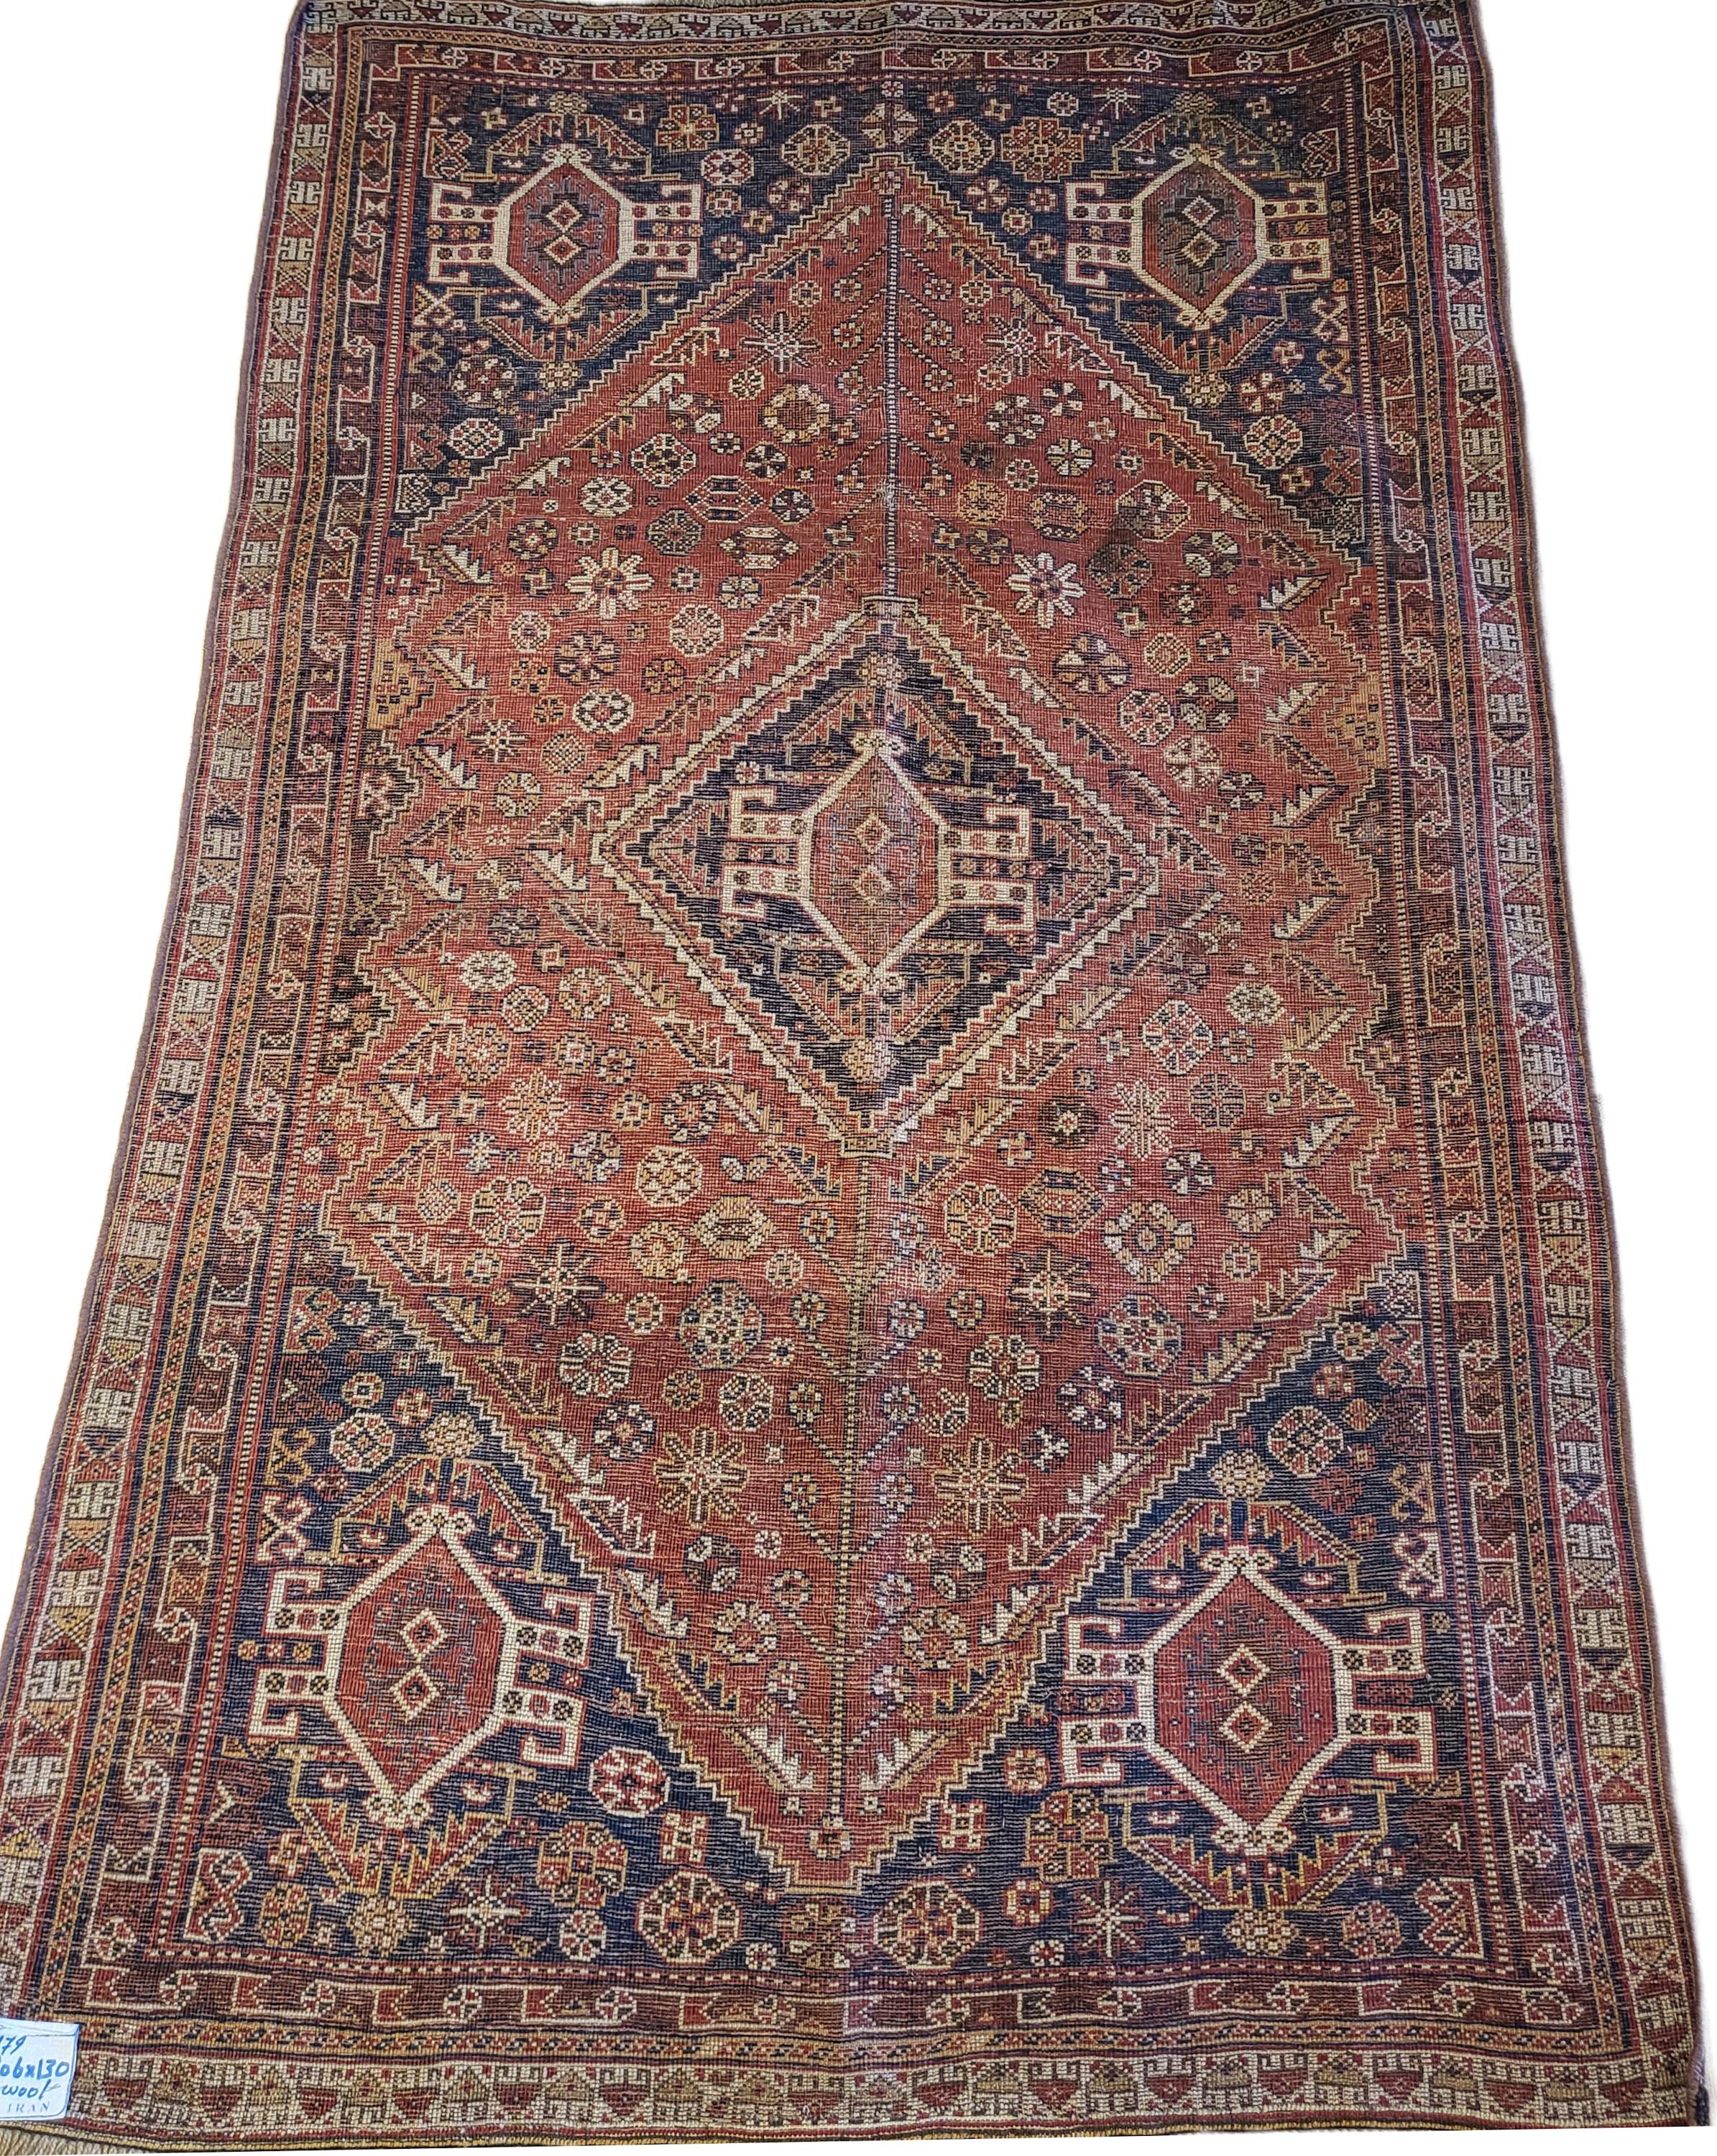 Late 1800's Qashqai - Nomadic Persian Rug - PRG Exclusive In Good Condition For Sale In Blacksburg, VA